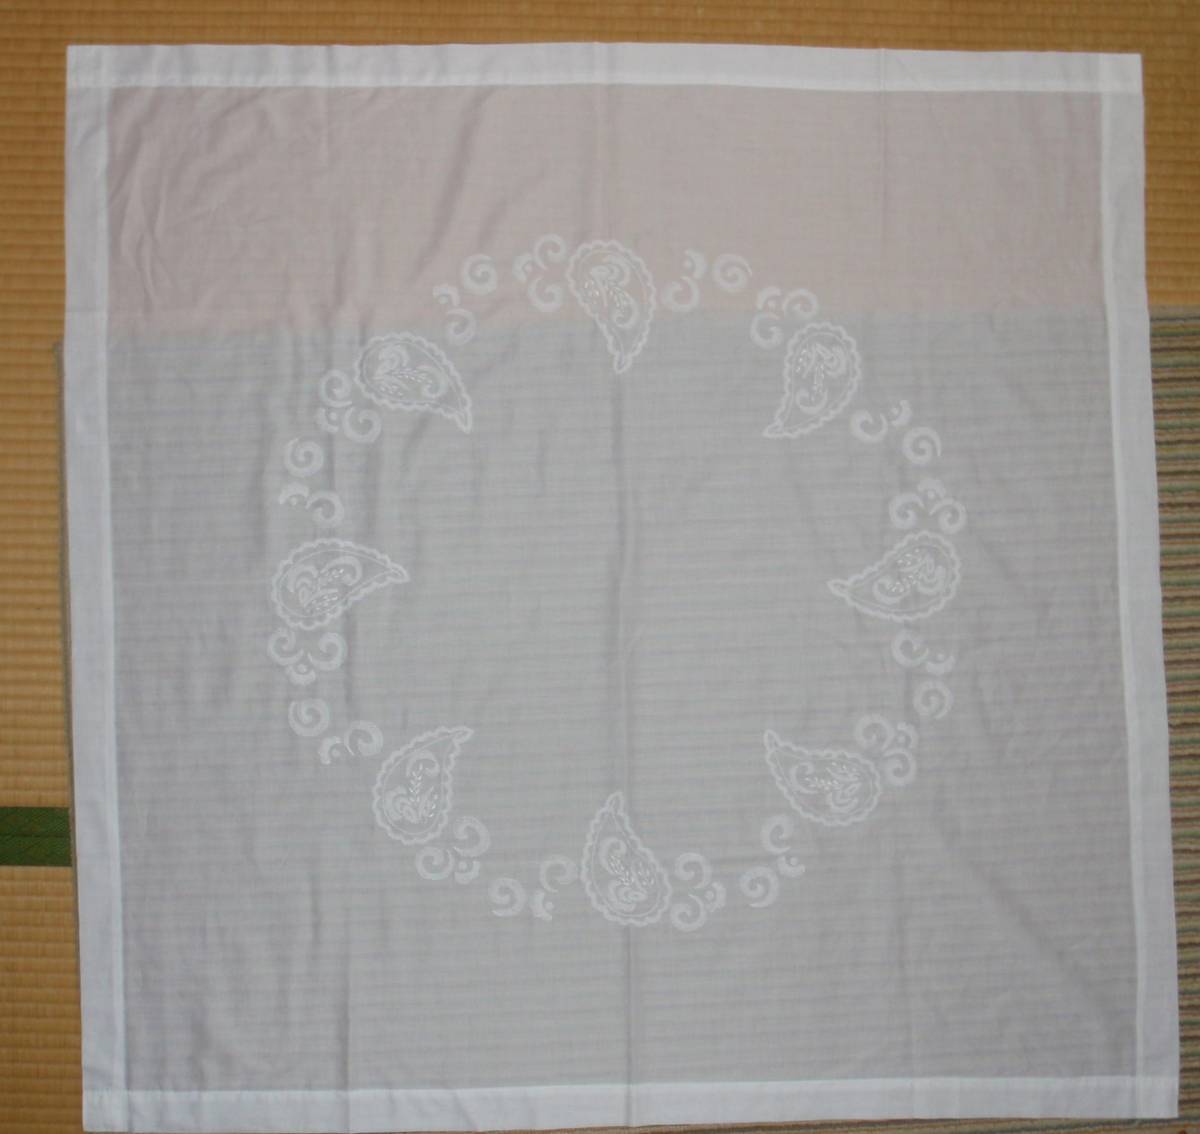  hand embroidery shadow stitch table runner hand made 